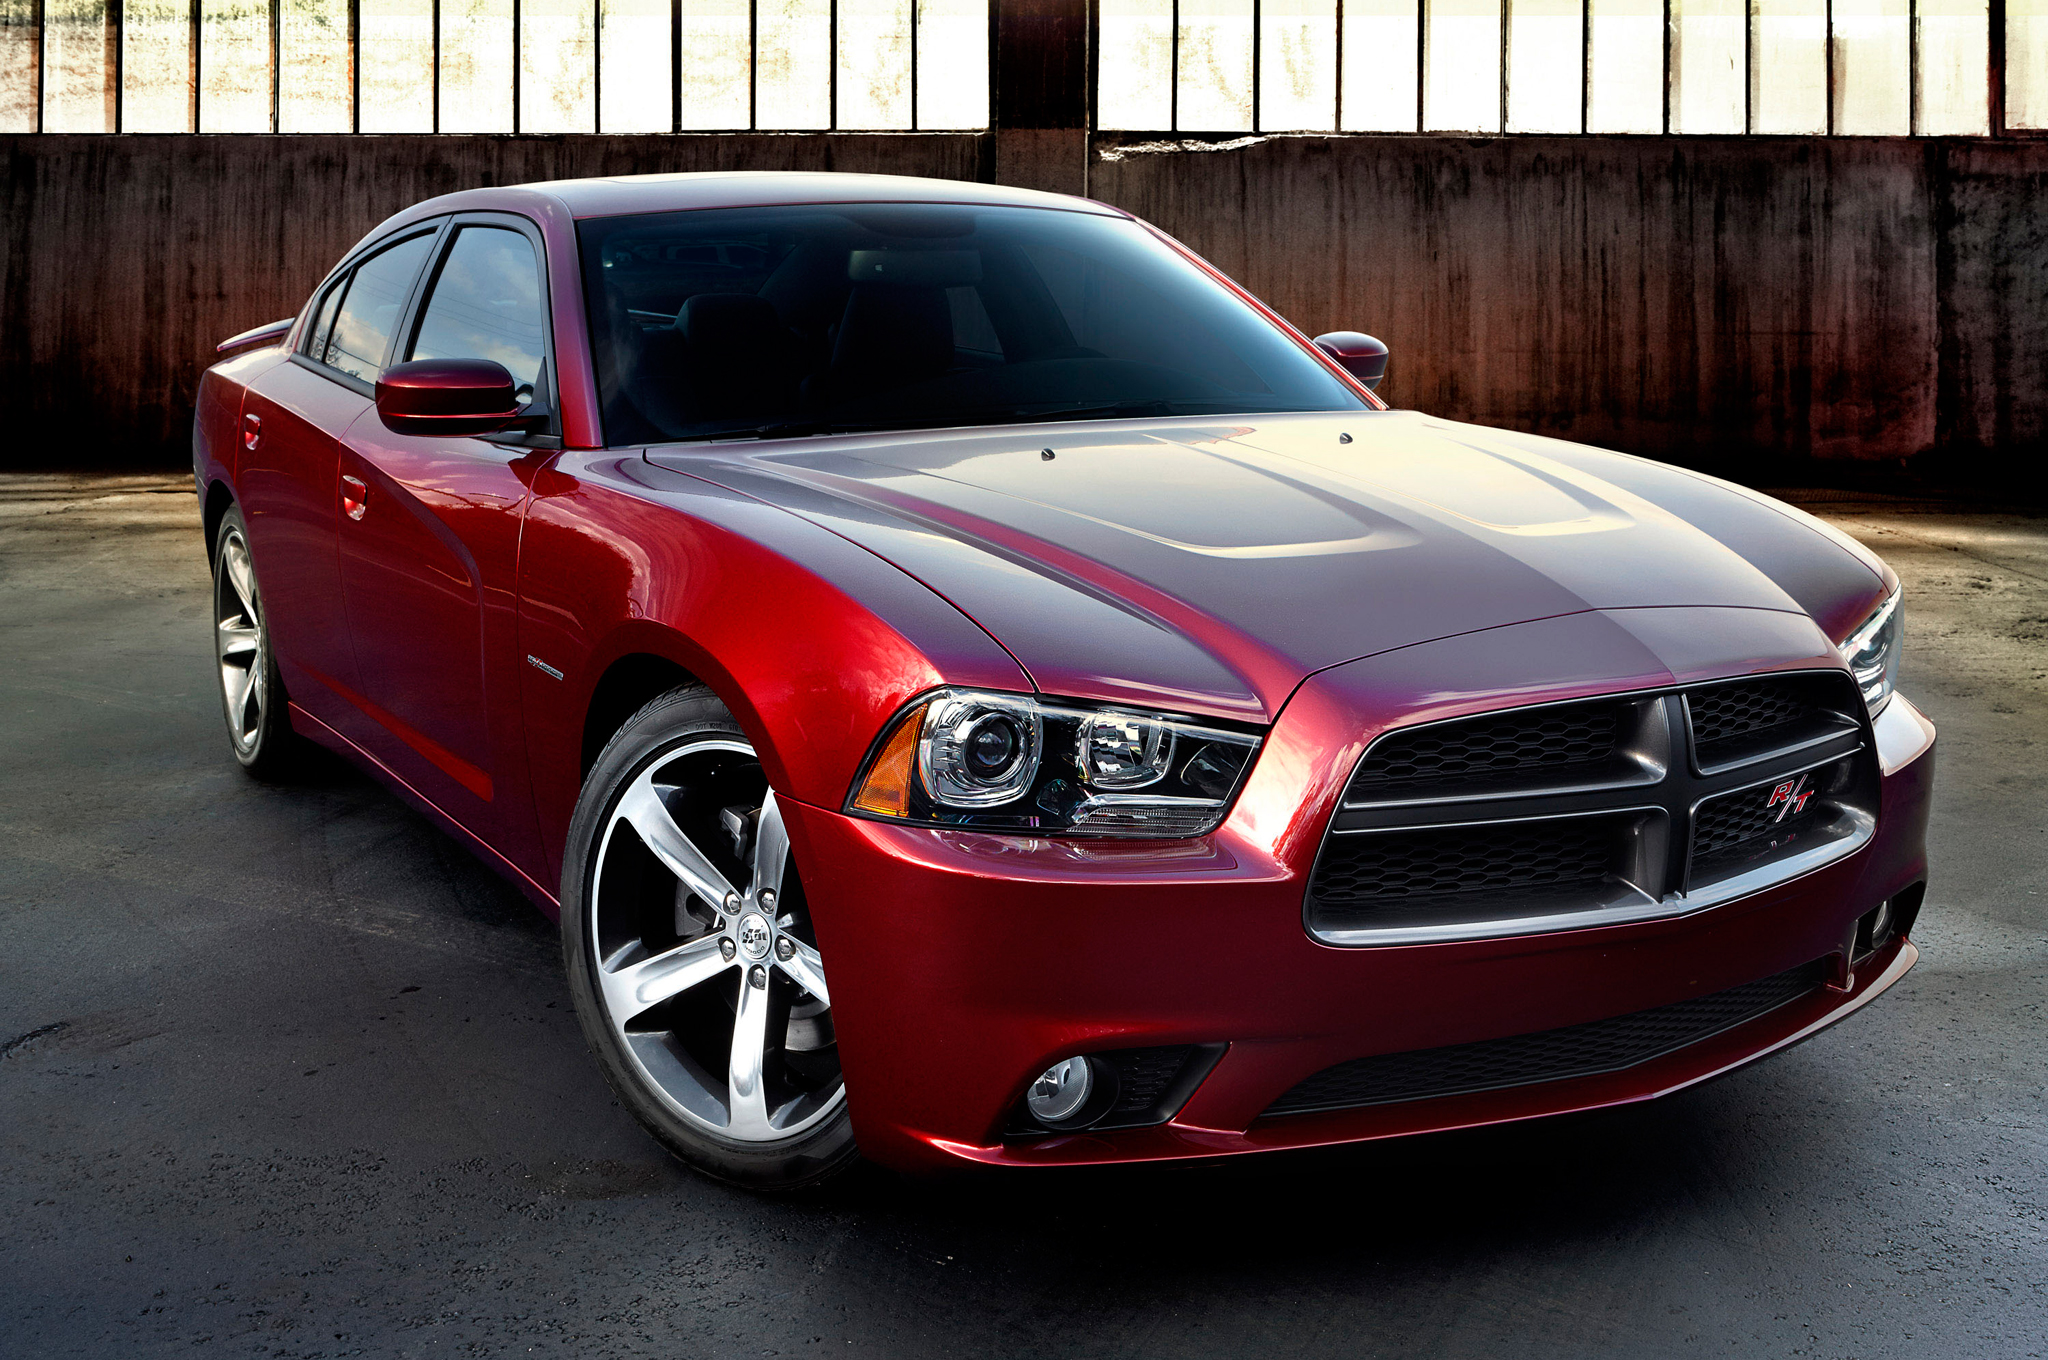 Dodge Charger Backgrounds on Wallpapers Vista